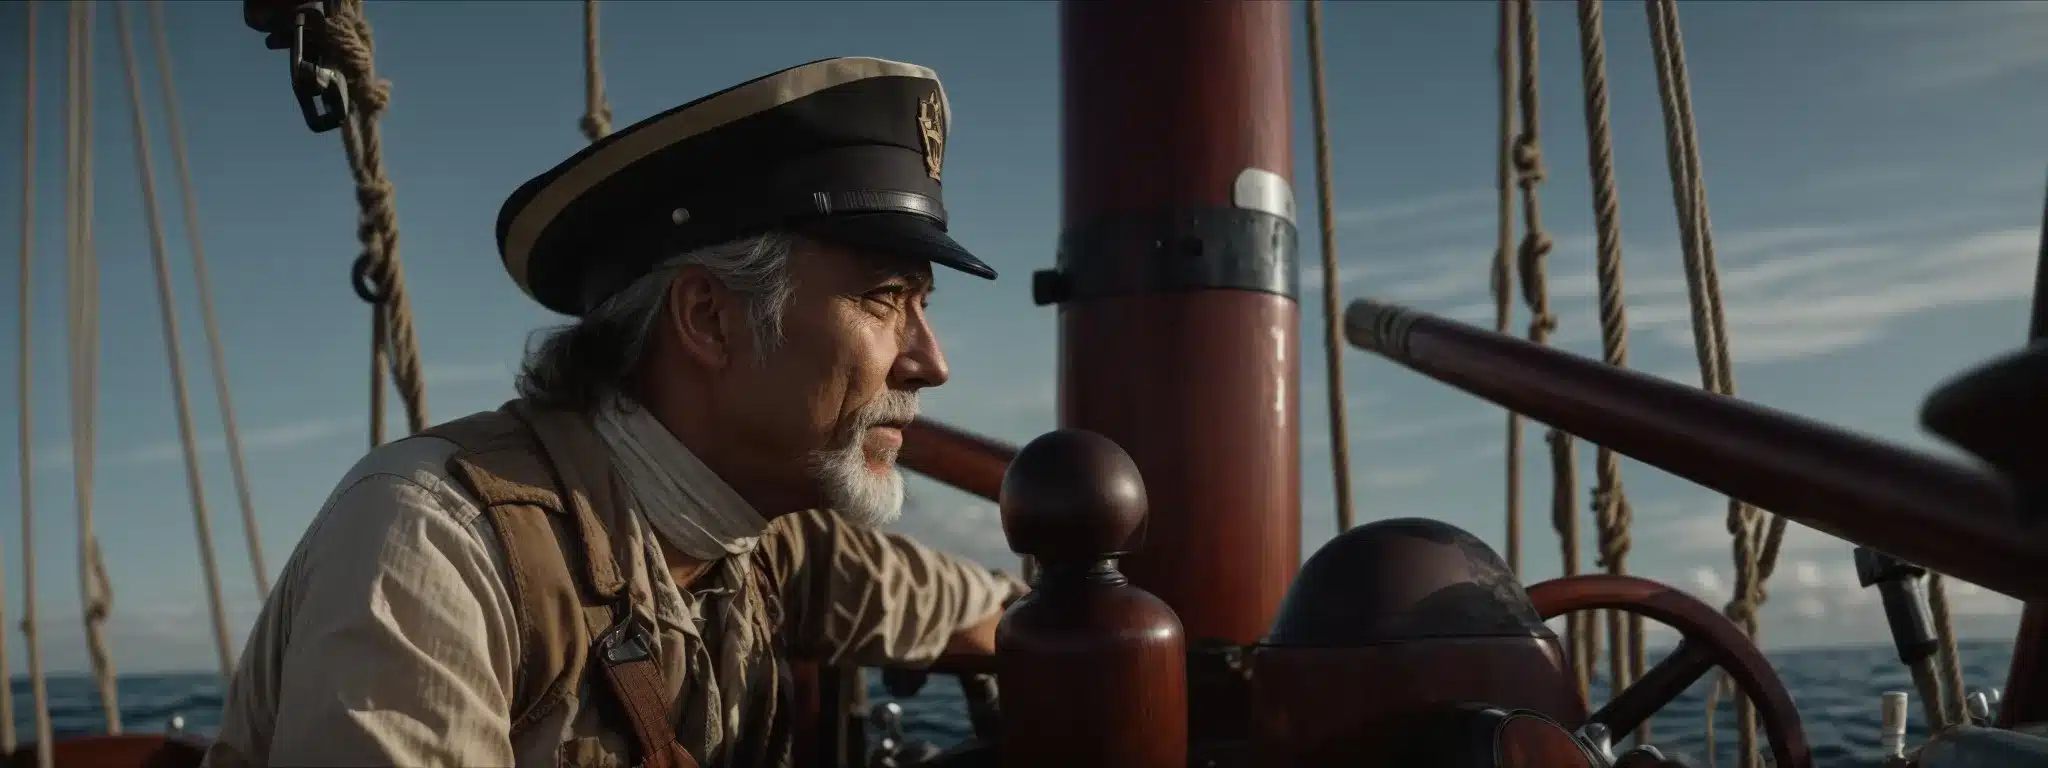 A Weathered Captain Steering A Wooden Ship Across A Calm Ocean Under Clear Skies.